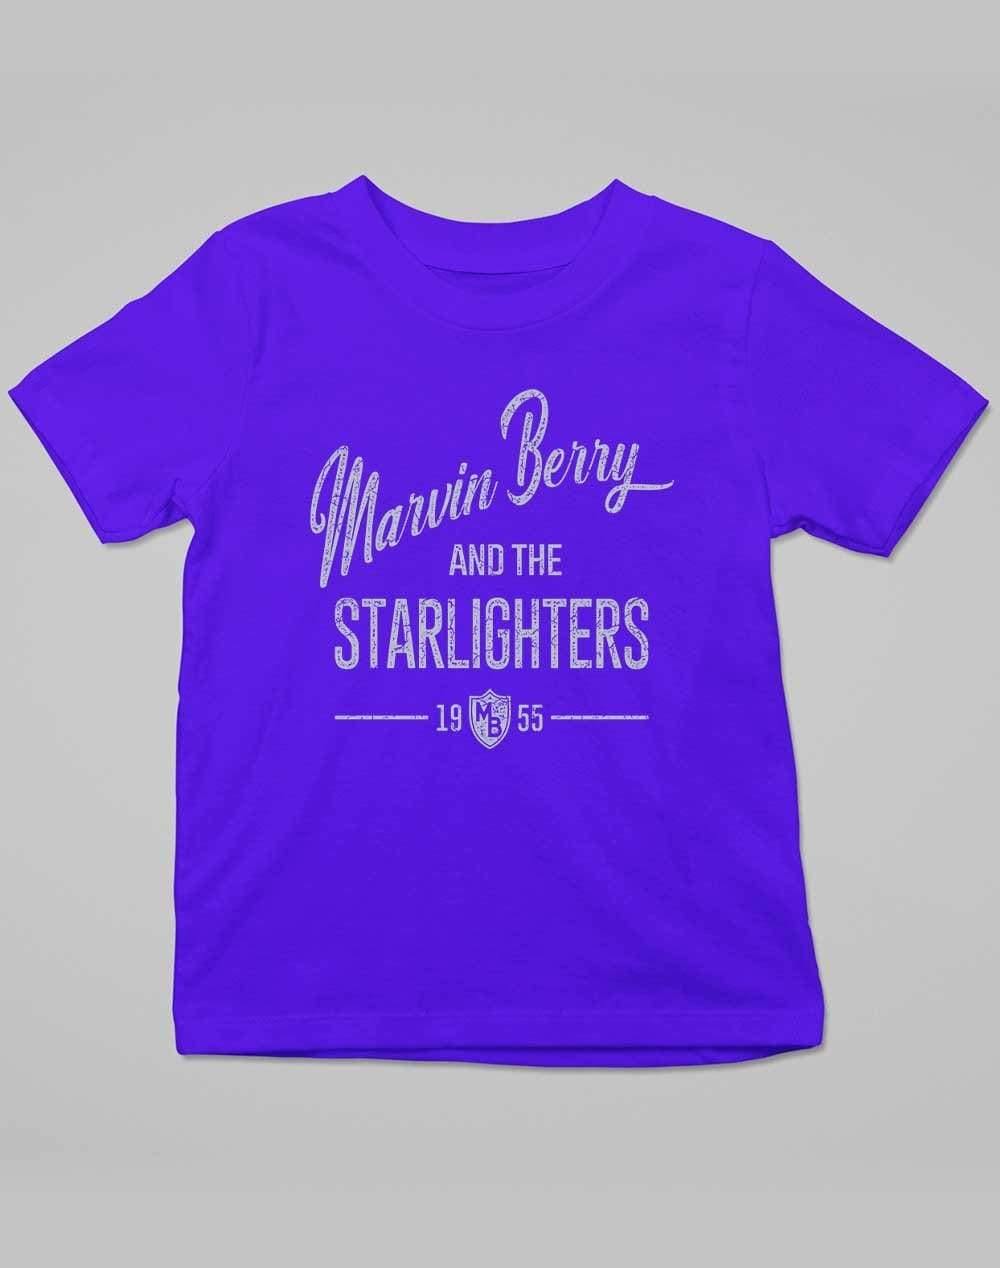 Marvin Berry and the Starlighters Kids T-Shirt 3-4 years / Royal Blue  - Off World Tees